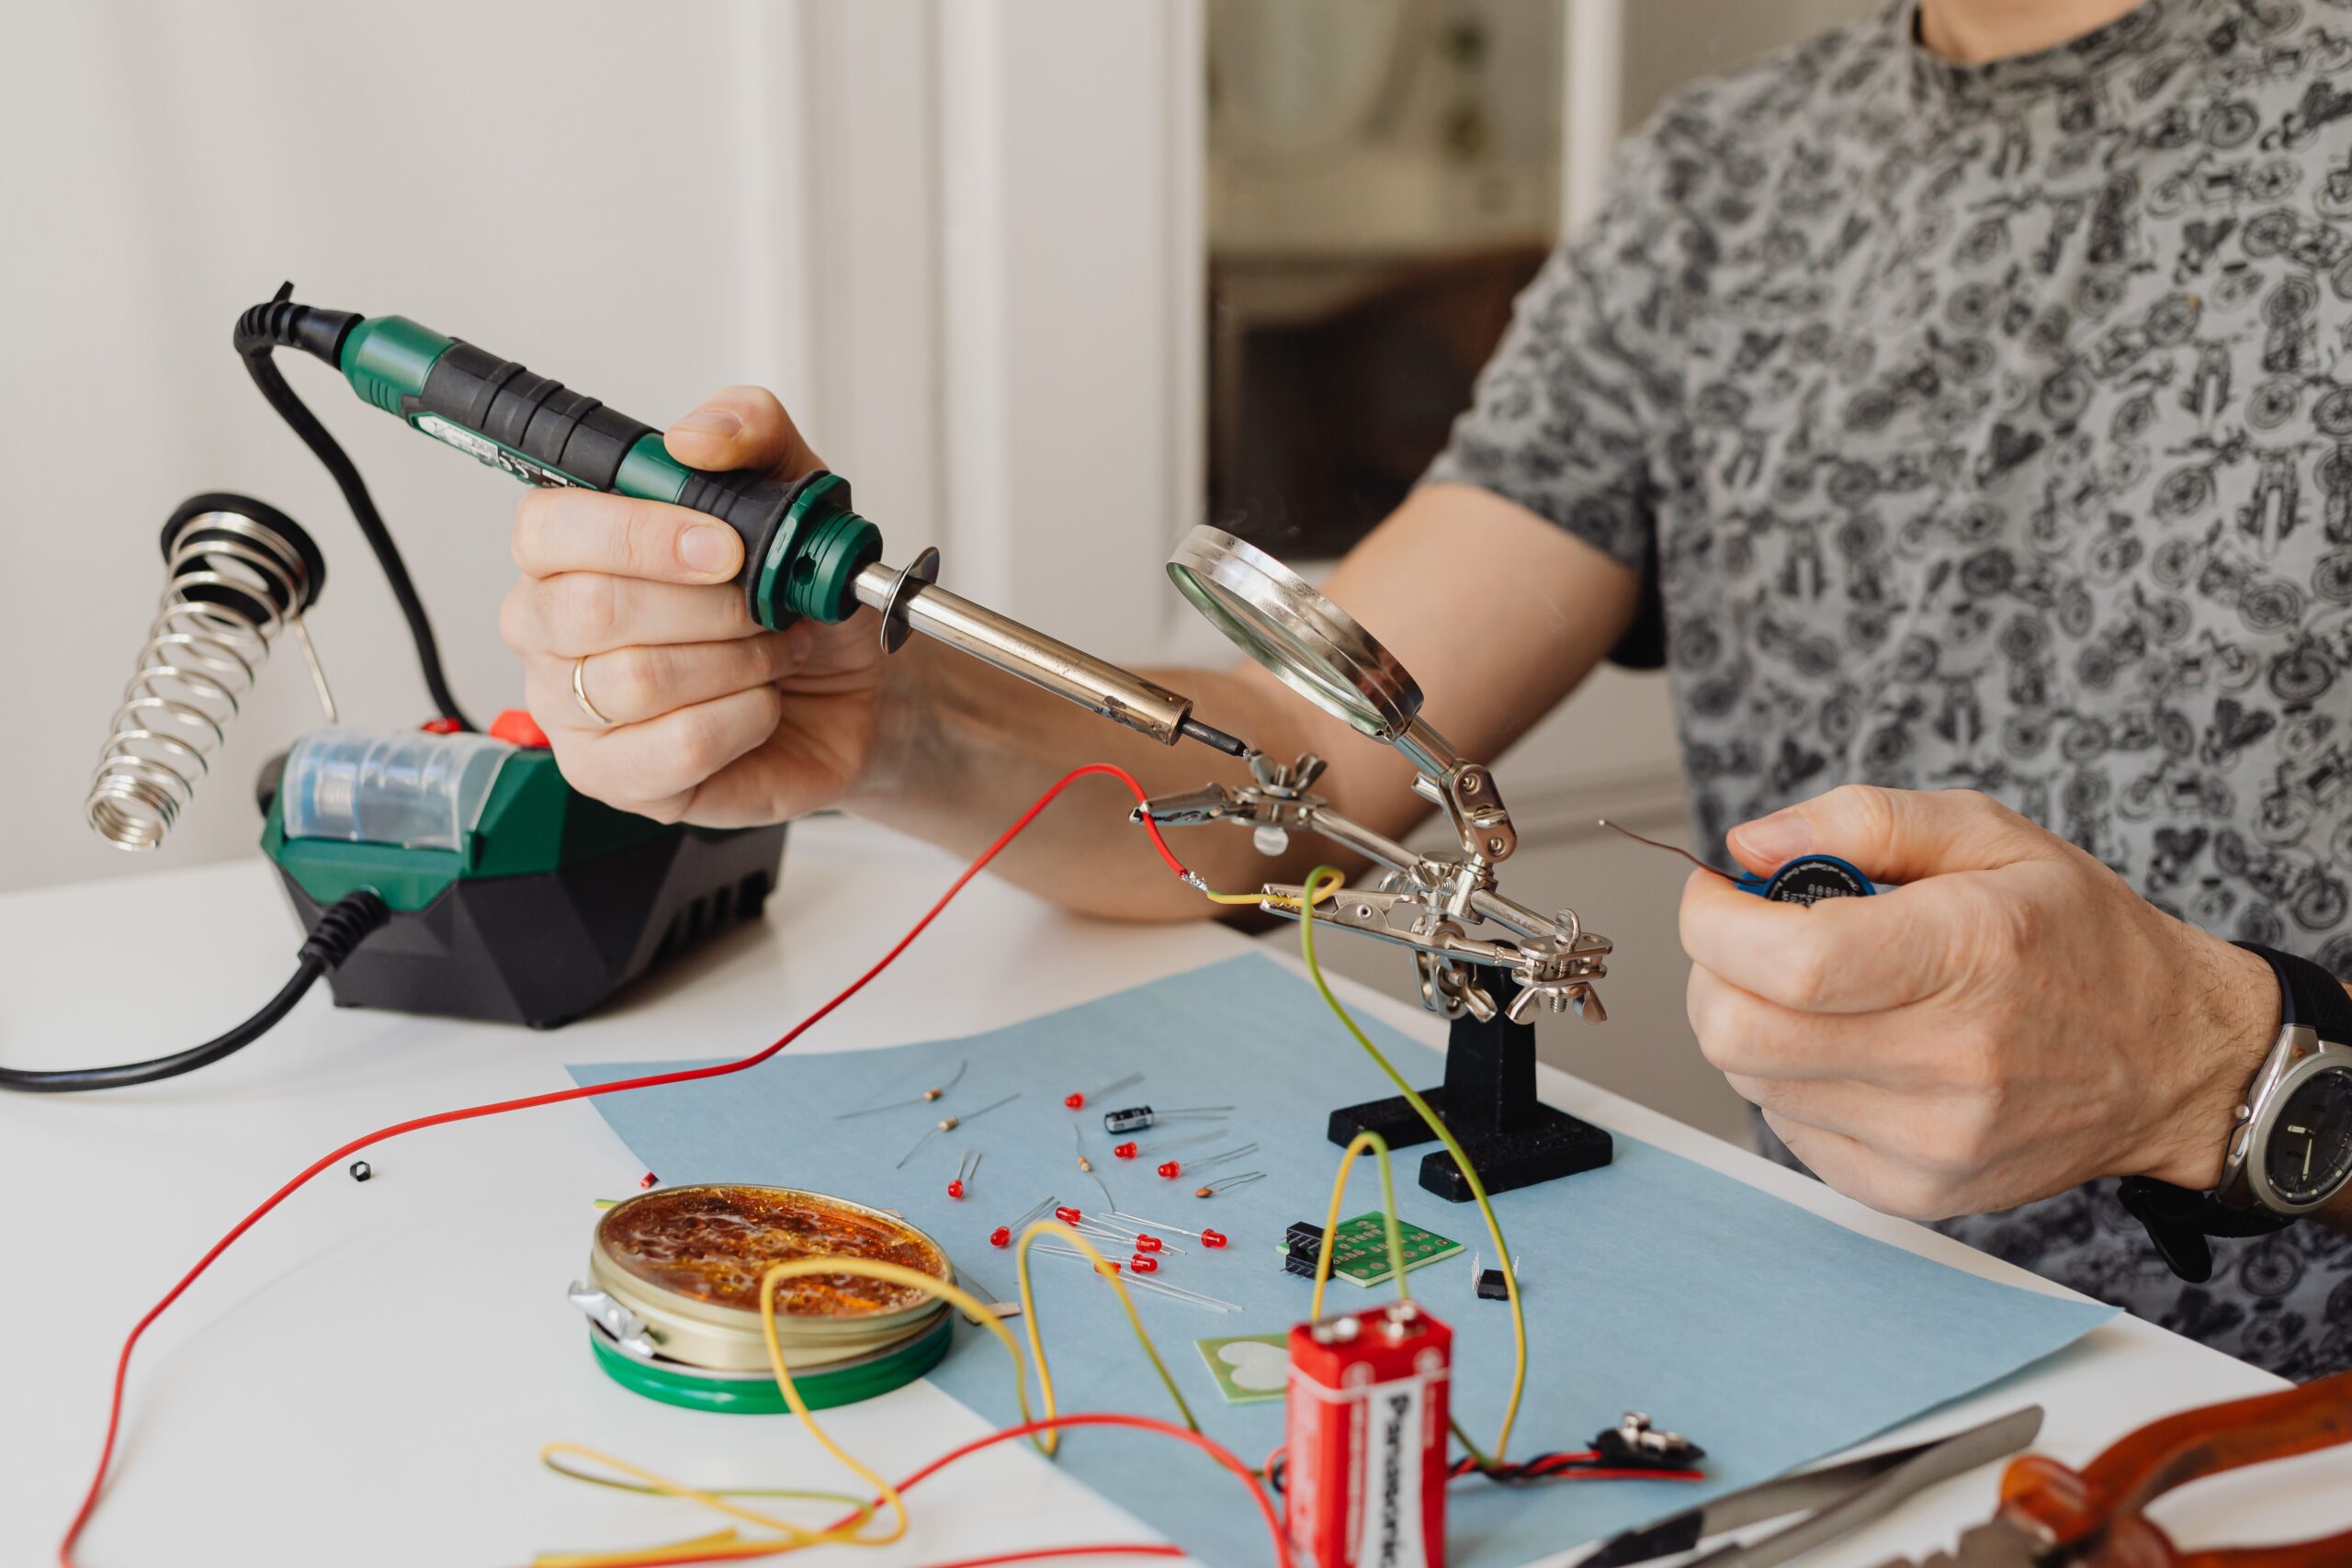 The Do's and Don'ts of DIY Electrical Repairs